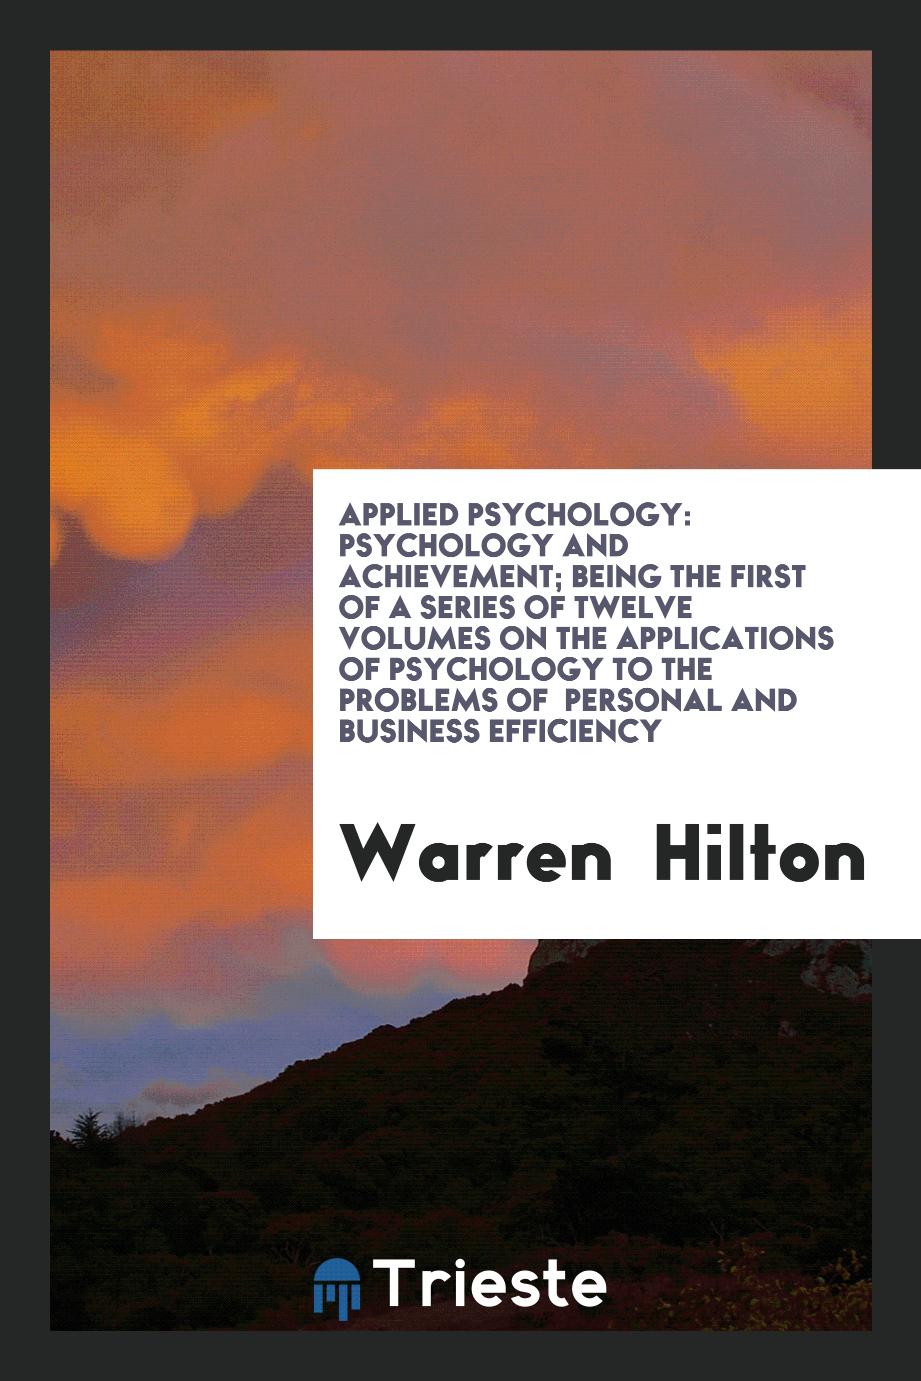 Applied Psychology: Psychology and Achievement; Being the First of a Series of Twelve Volumes on the Applications of Psychology to the Problems of Personal and Business Efficiency